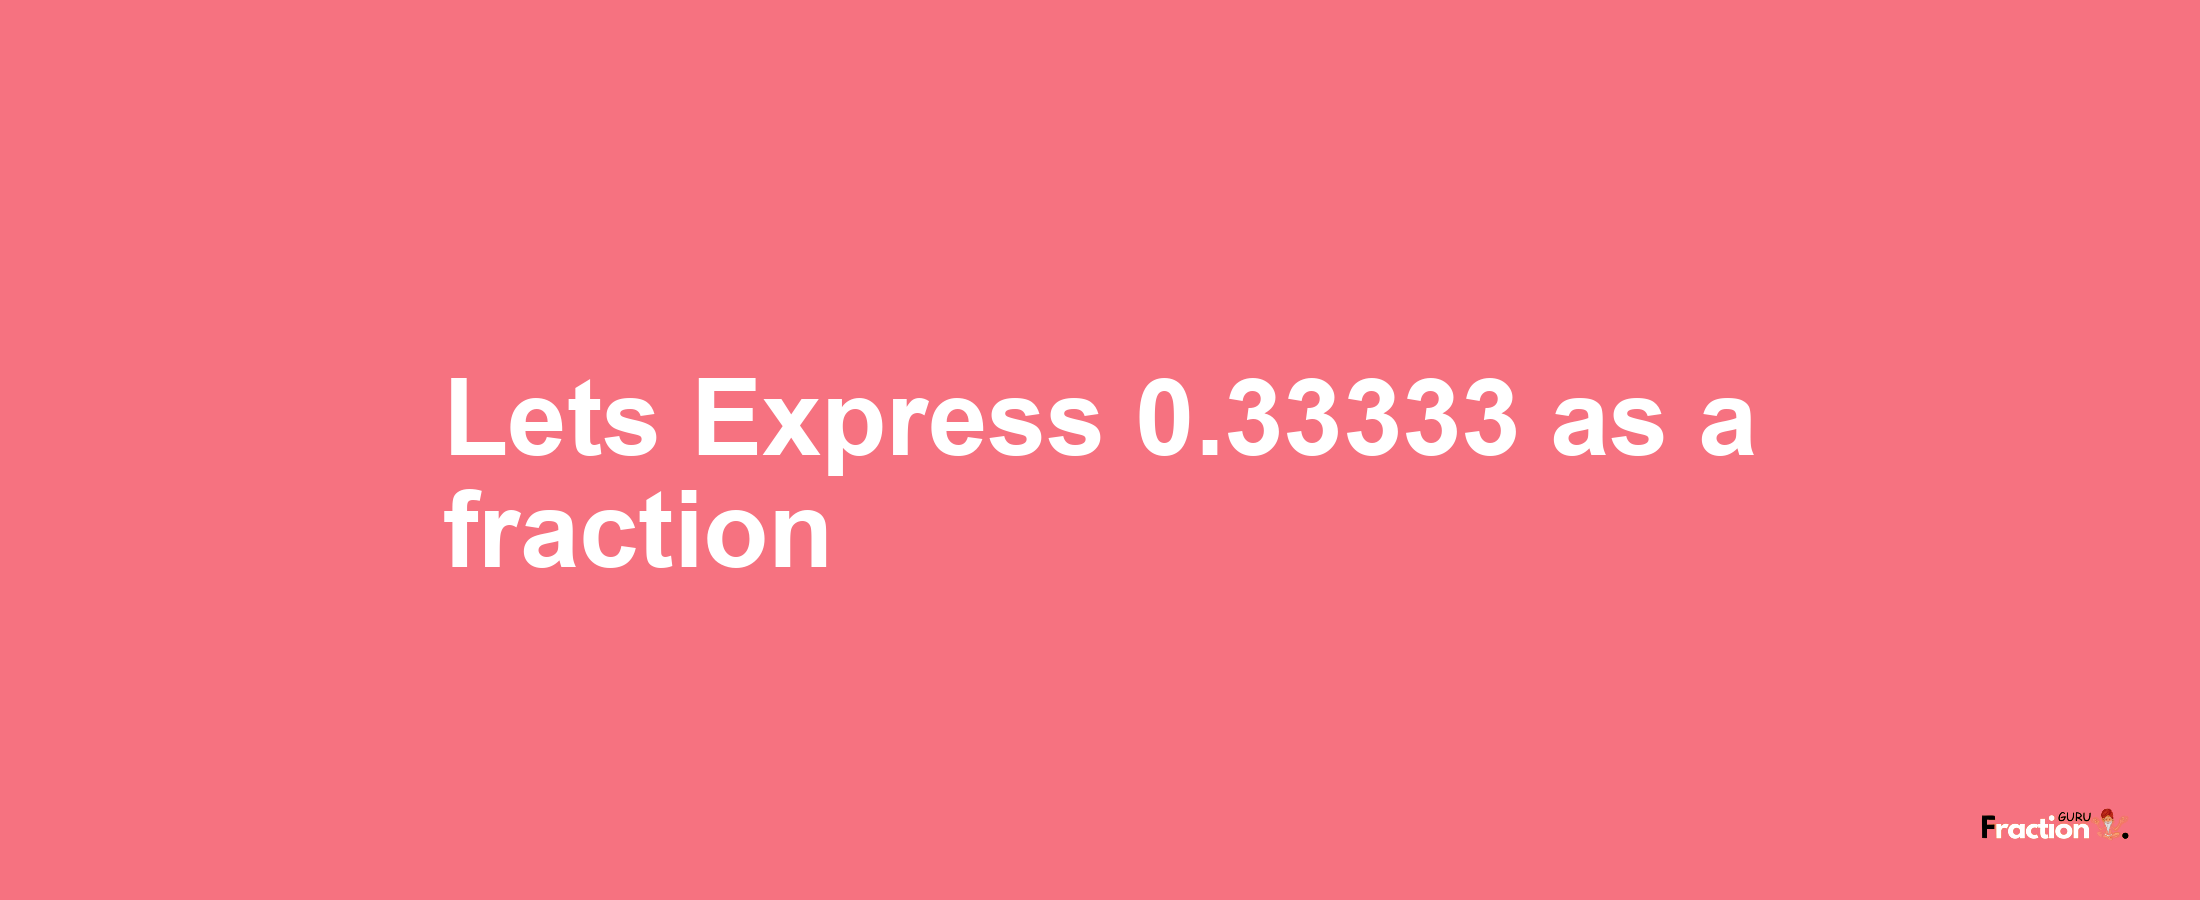 Lets Express 0.33333 as afraction